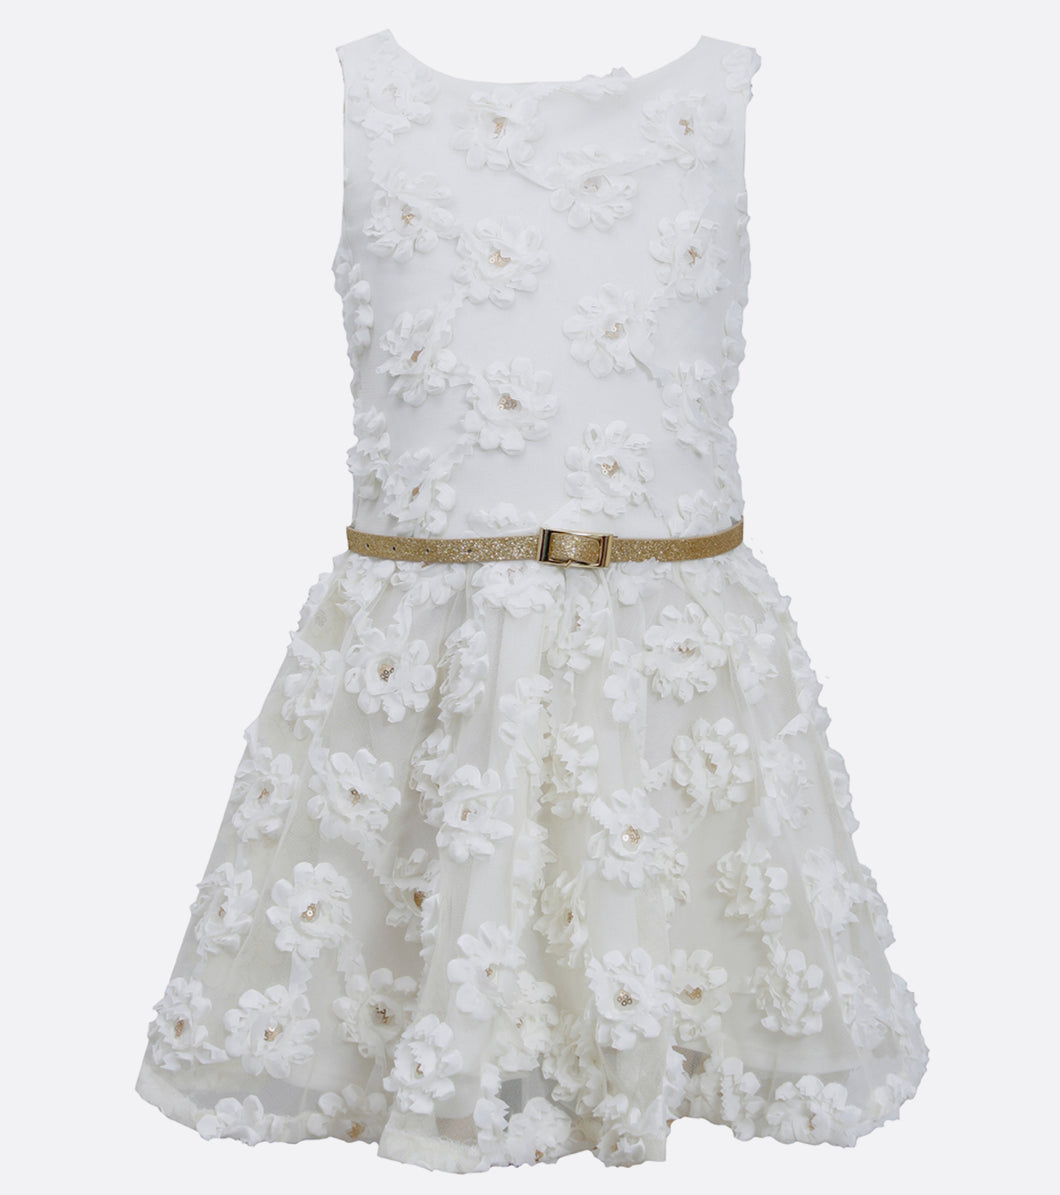 Bonnie Jean ivory and gold daisy dress